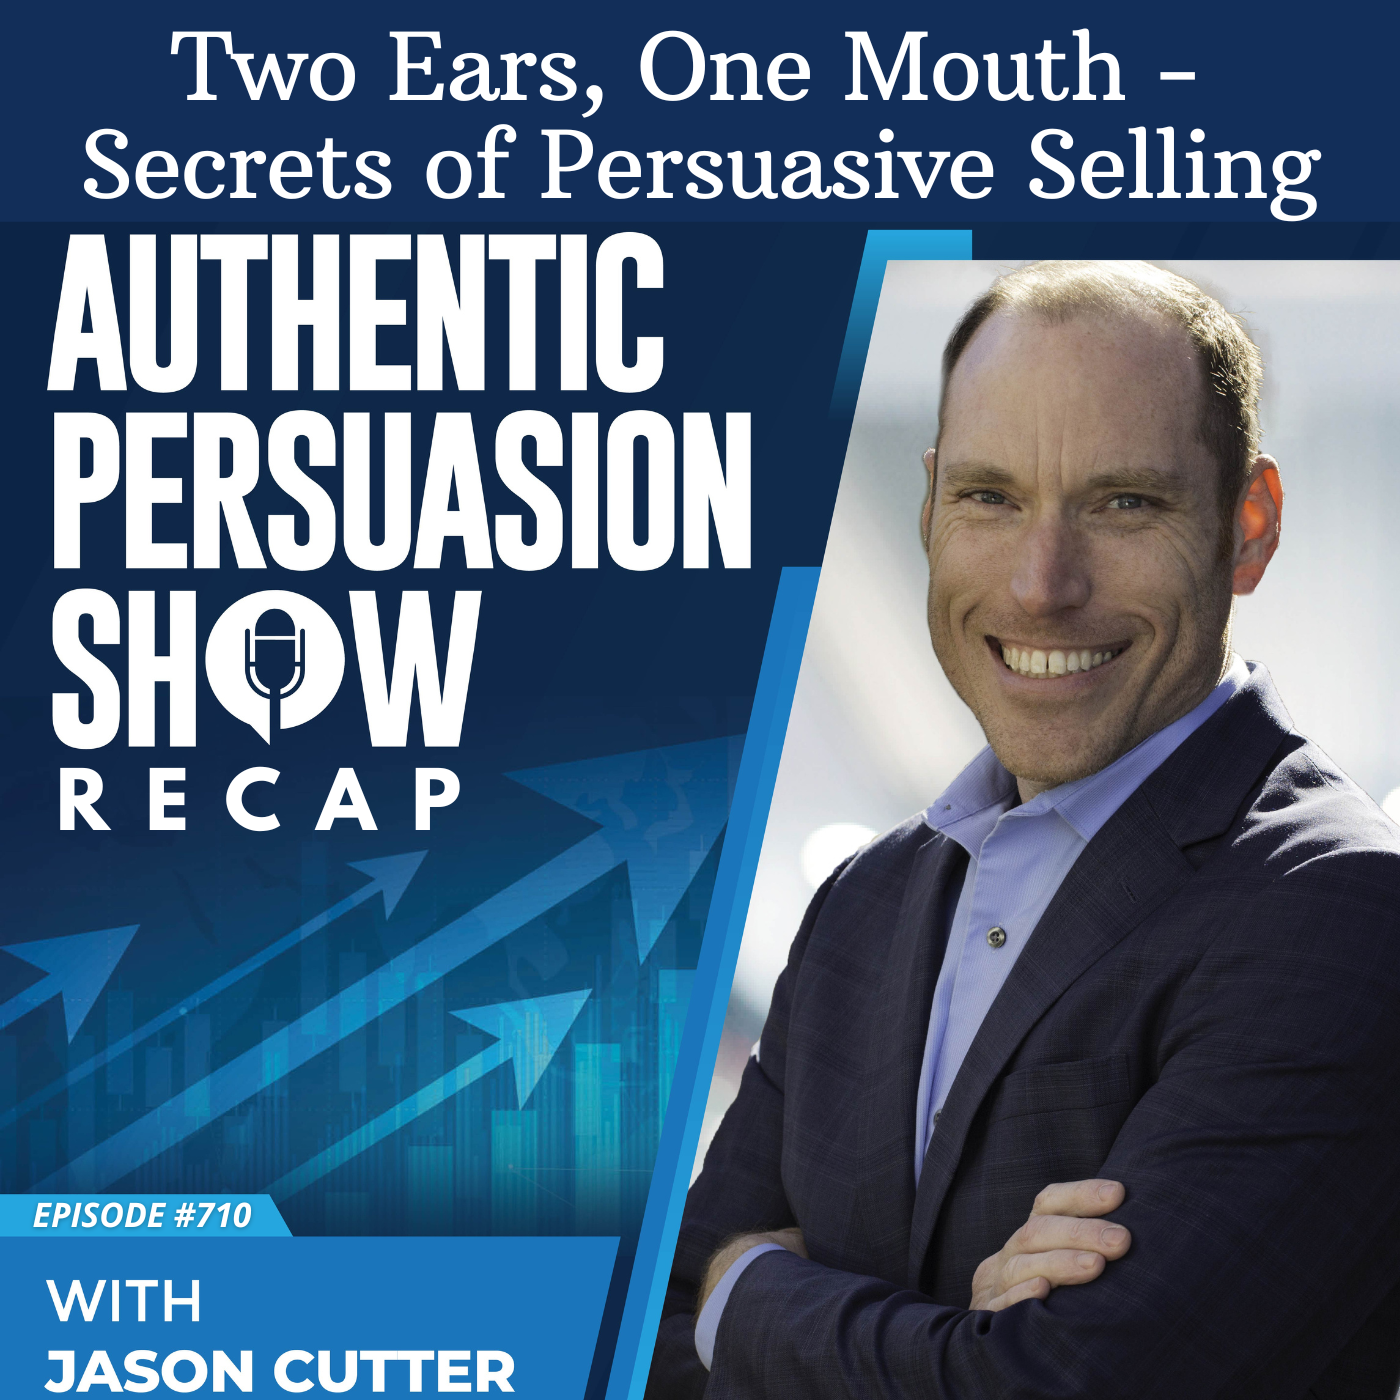 [710] Two Ears, One Mouth - Secrets of Persuasive Selling